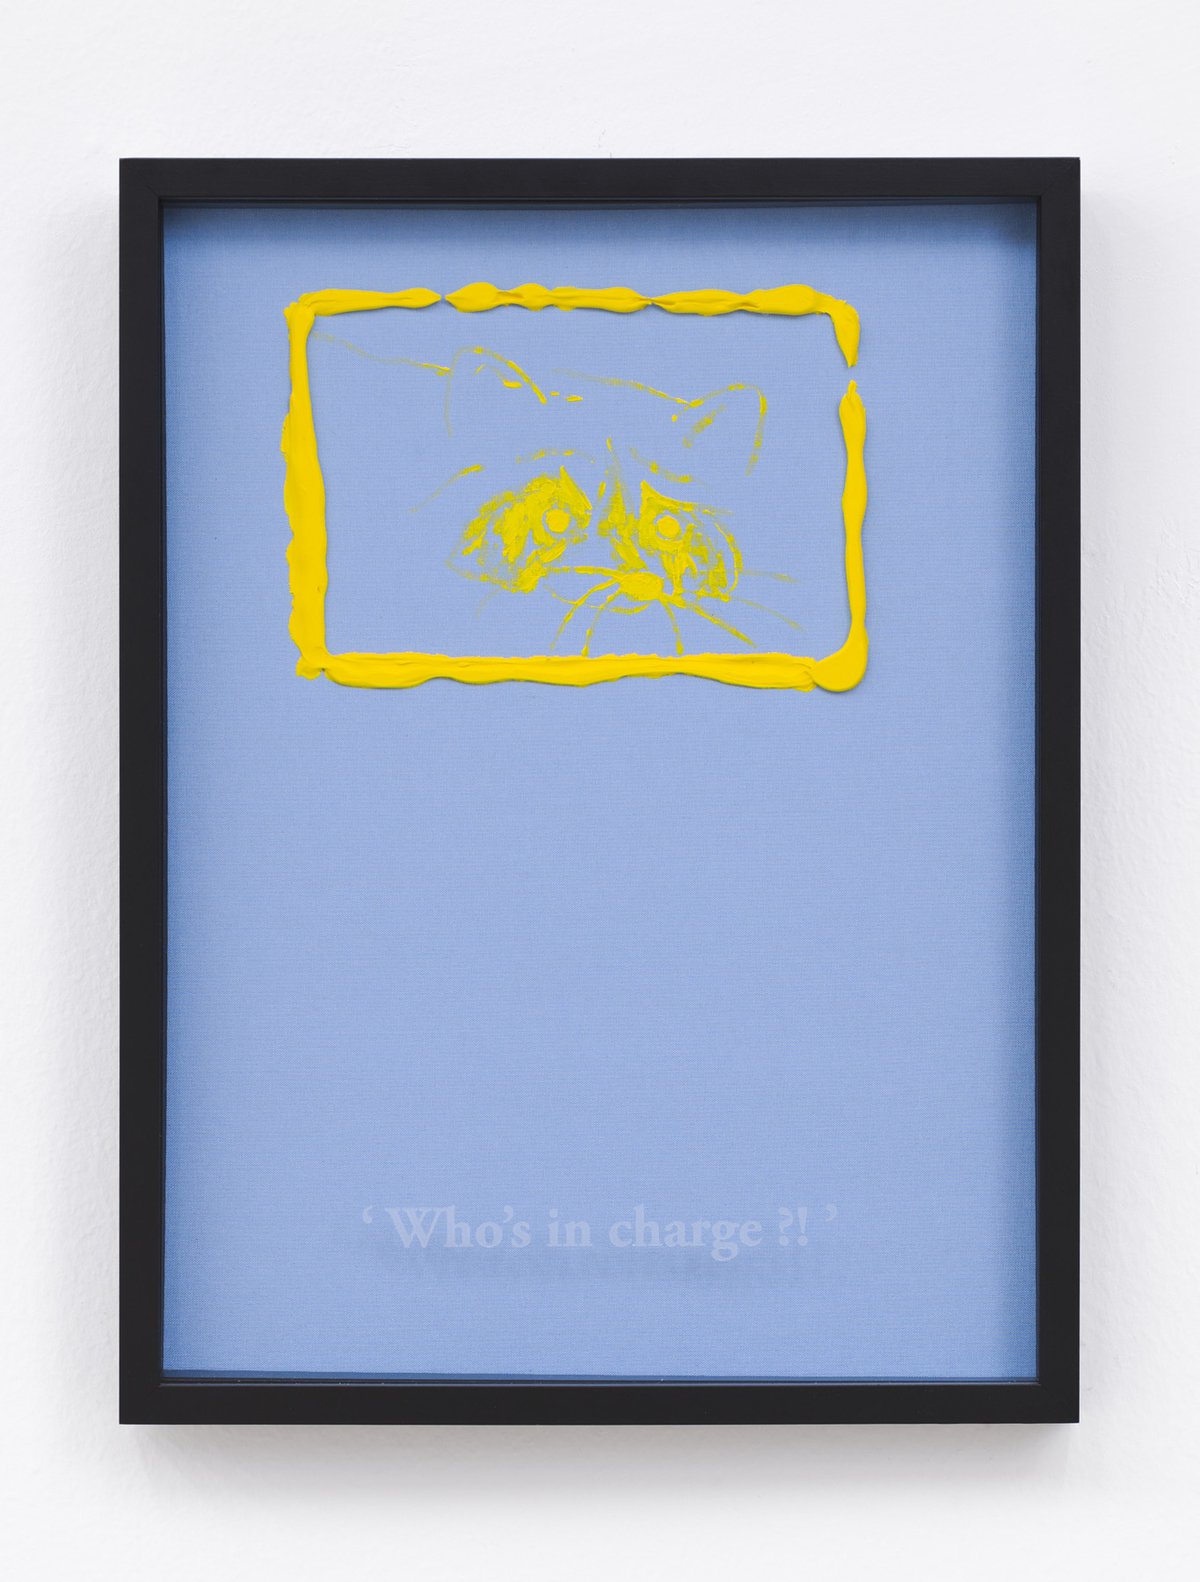 Philipp Timischl&quot;Who&#x27;s in charge?!&quot; (Light Blue/Cadmium Yellow Lemon), 2017Acrylic on linen and glass-engraved object frame40.1 x 32.1 cm